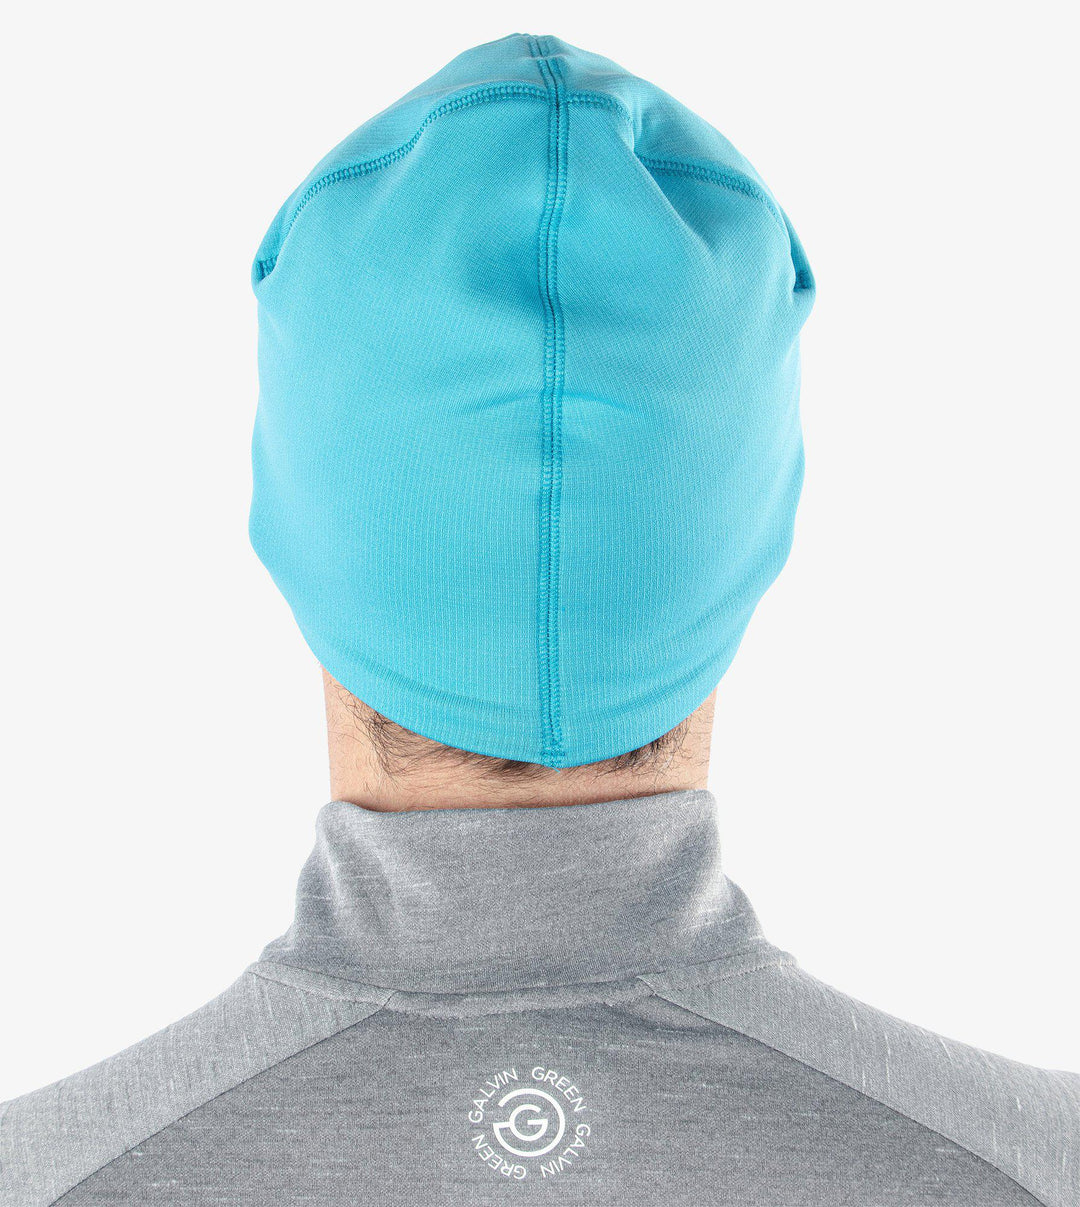 Denver is a Insulating hat for  in the color Aqua(4)